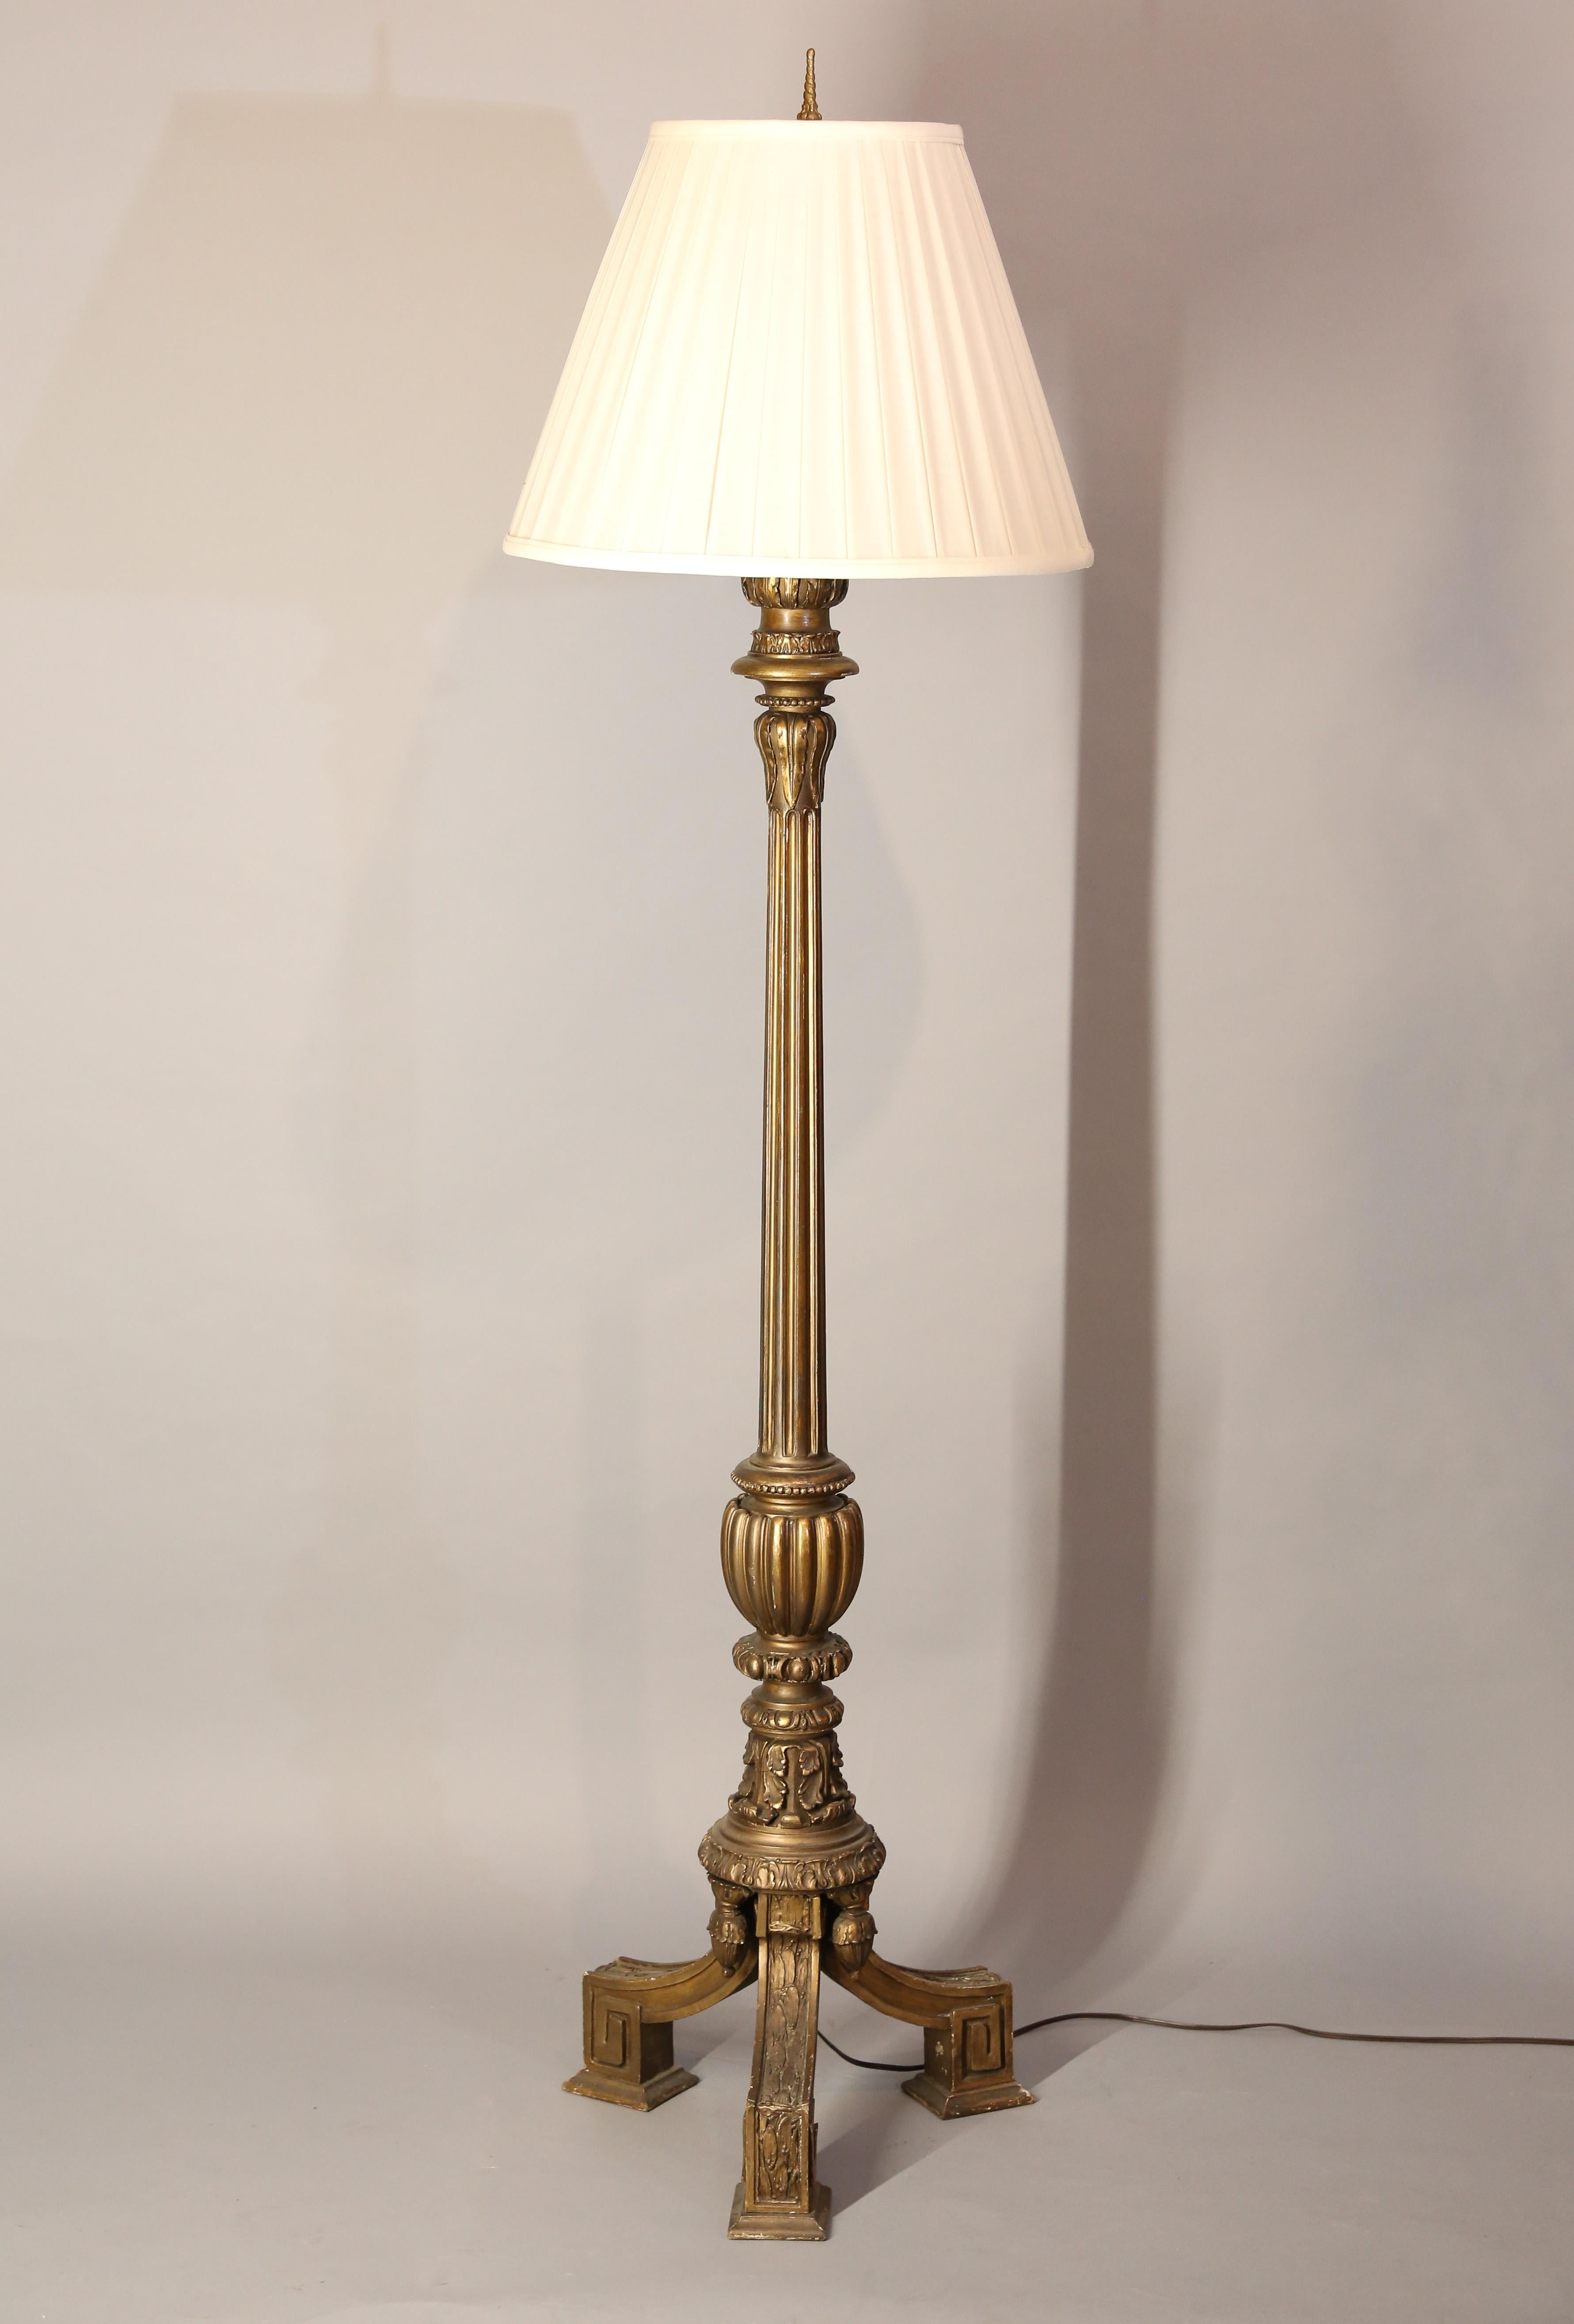 Neoclassical floor lamp is gilded to resemble bronze.
Lamp features carved acanthus leaves, and fluting and sits upon tripod base.
 